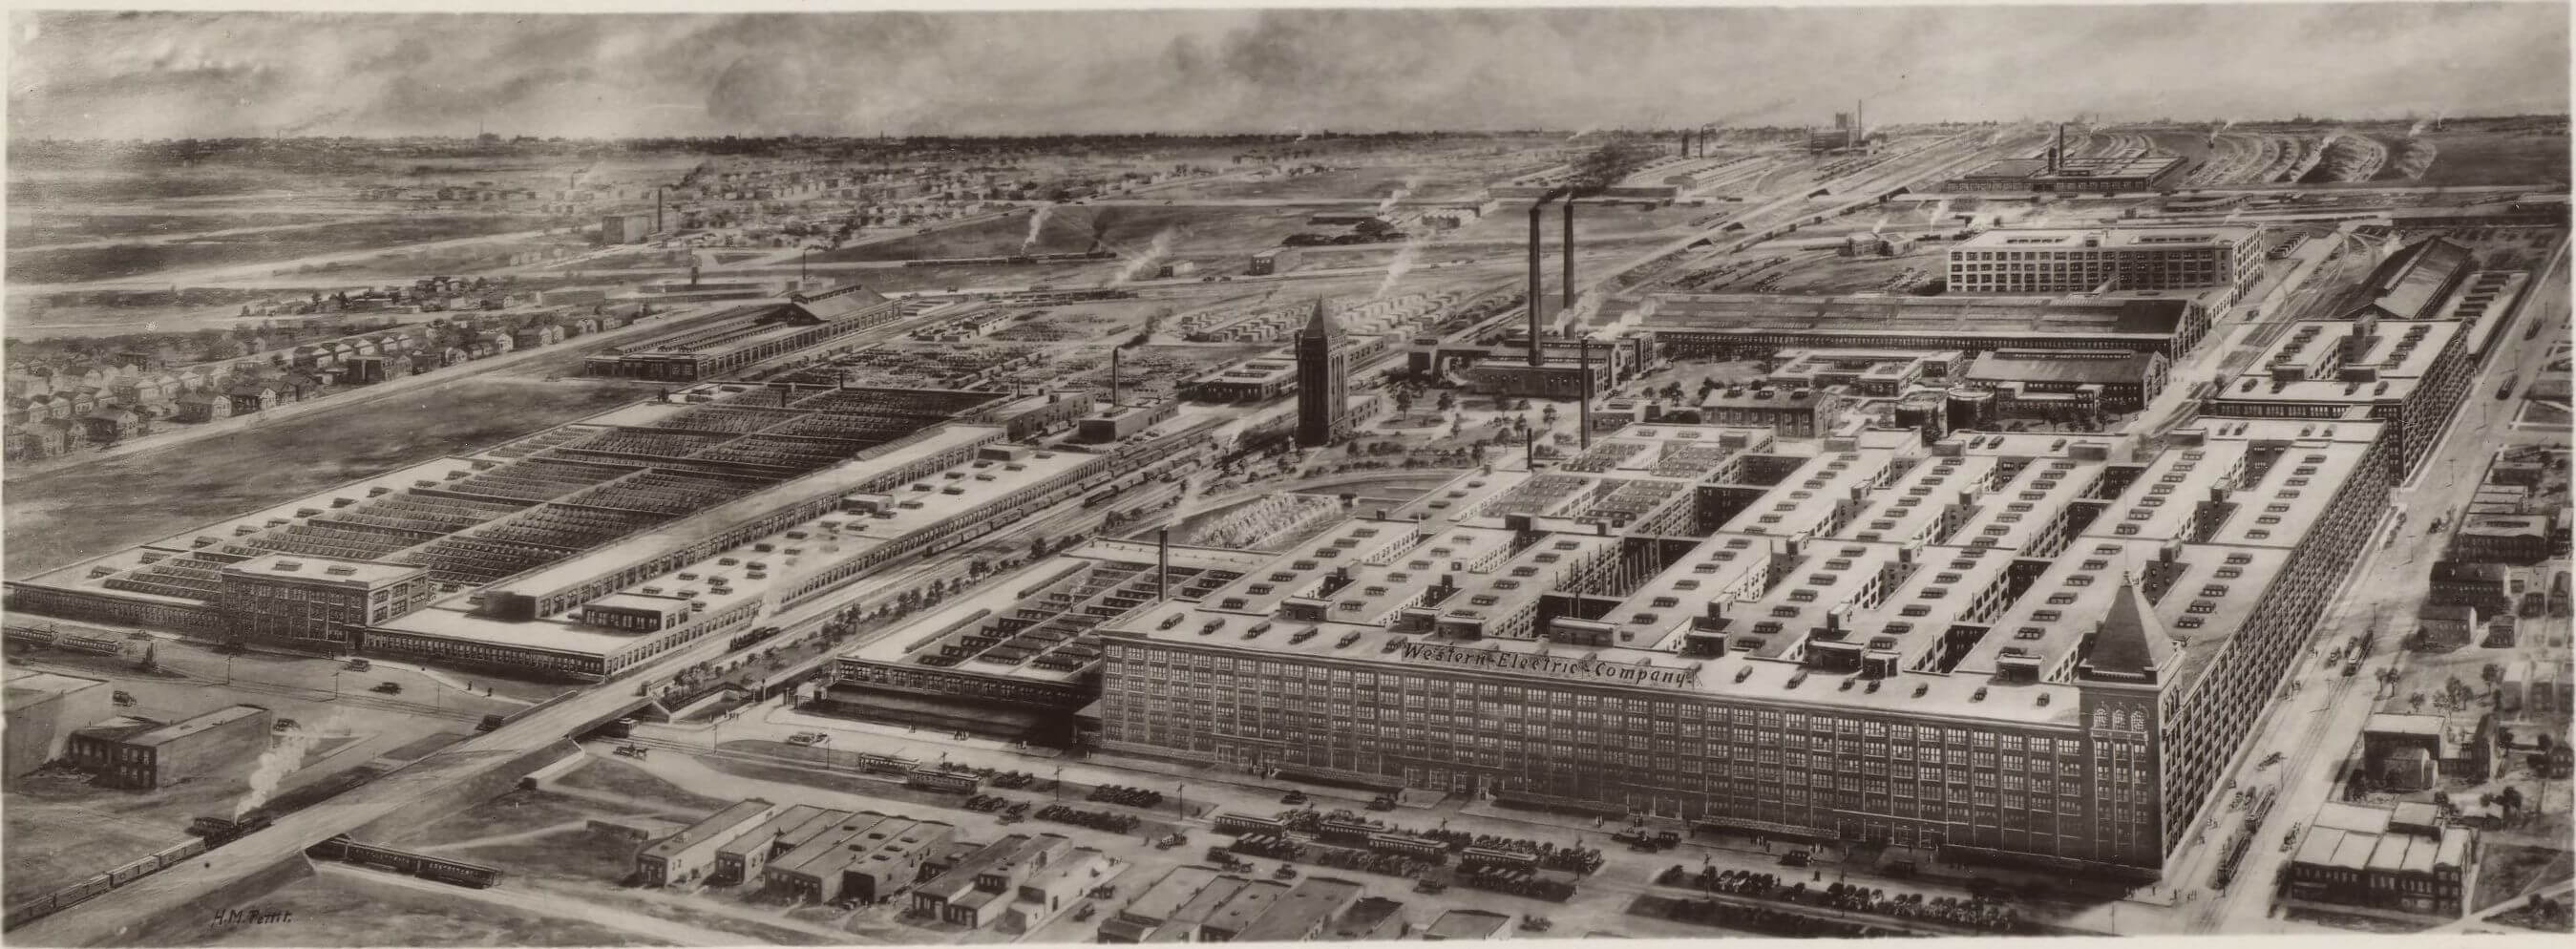 Arial view of Hathorne Plant in the 1920s, illustration.